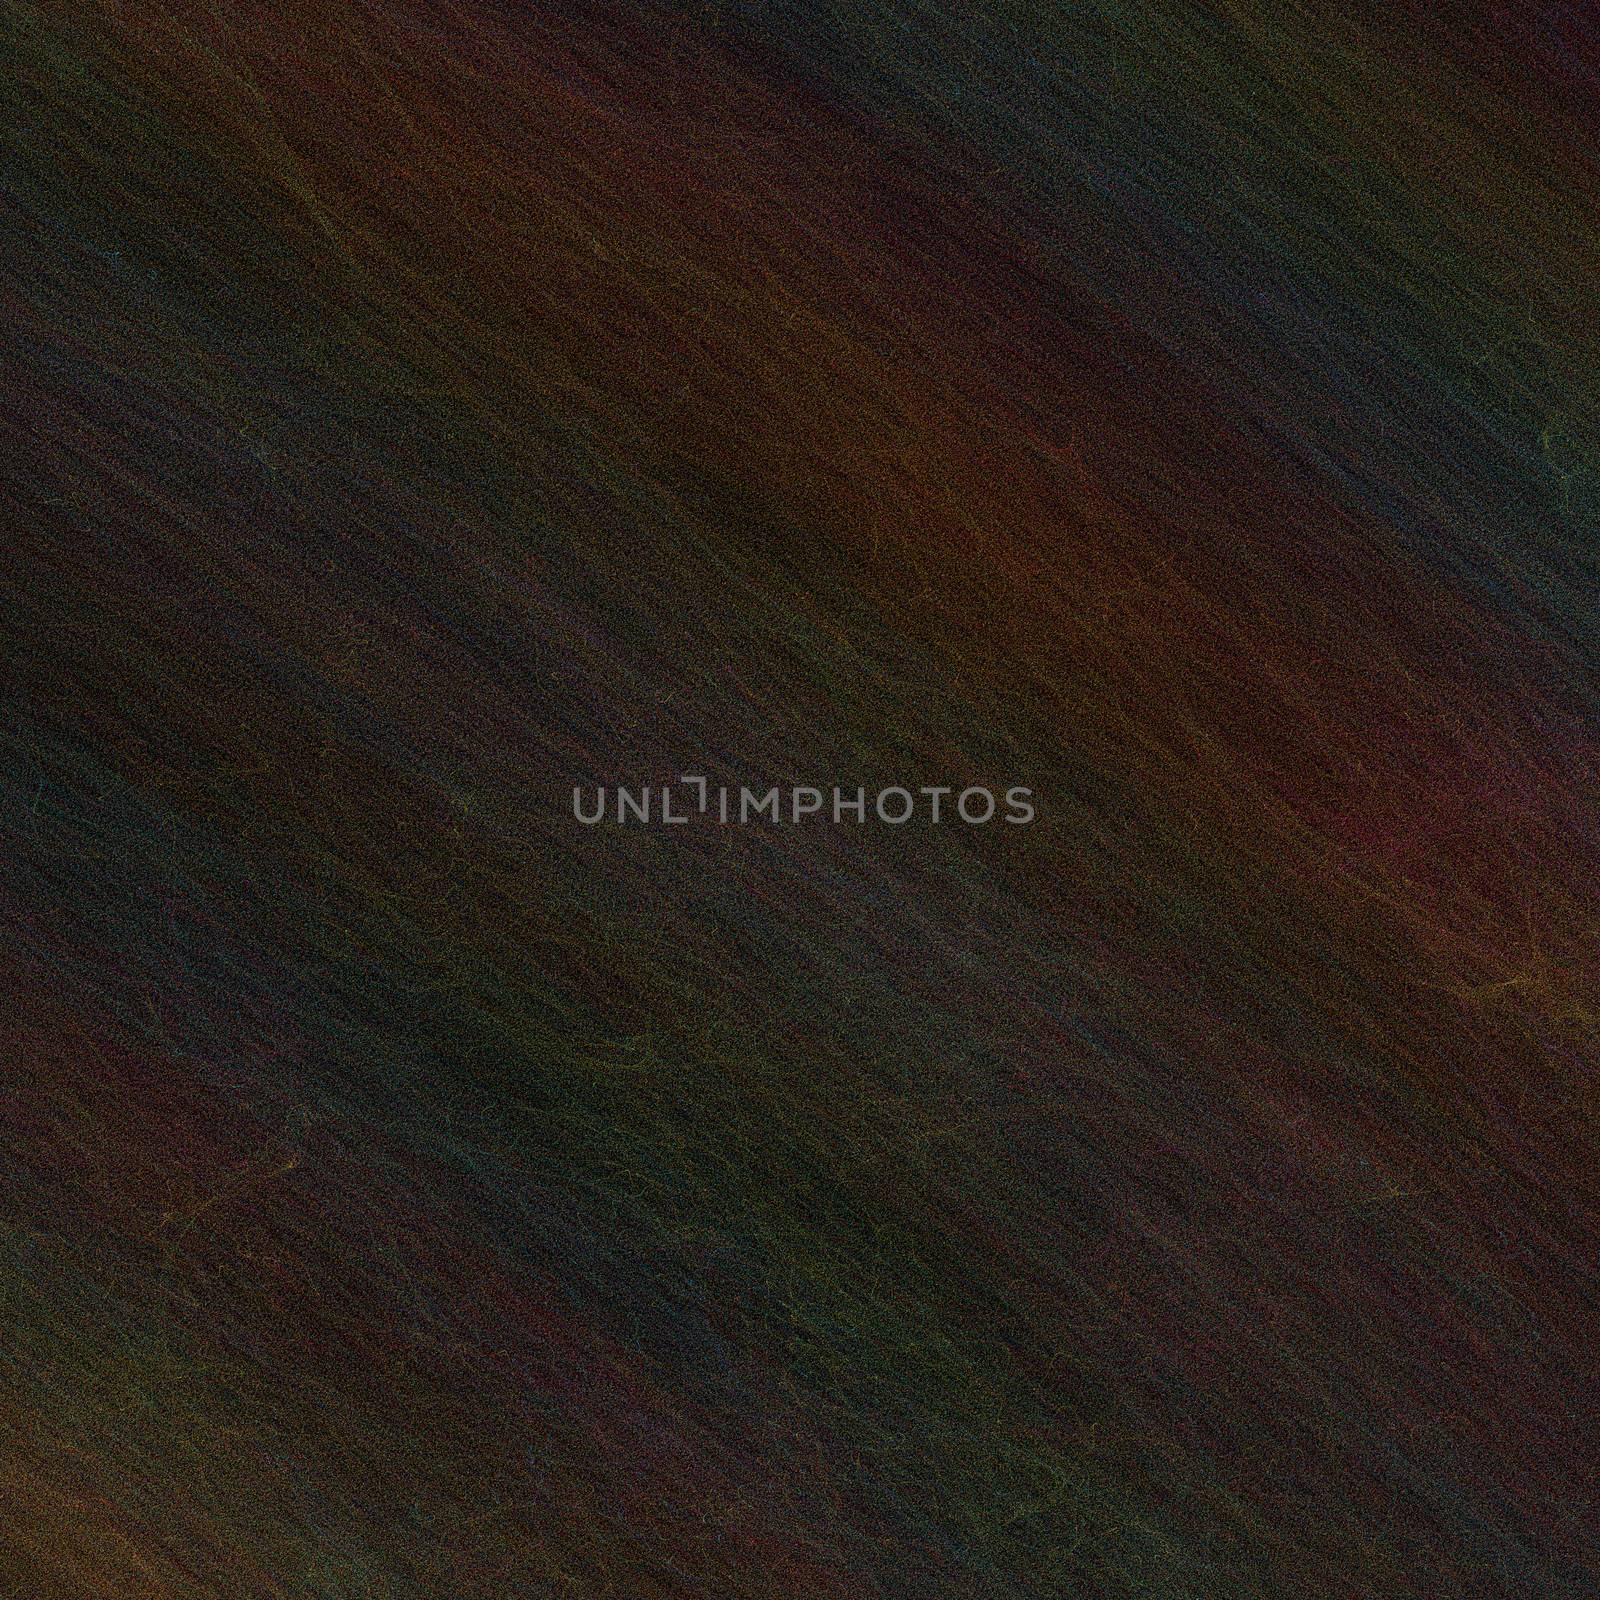 Dark Multicolor Abstract Noise Background for various design artworks